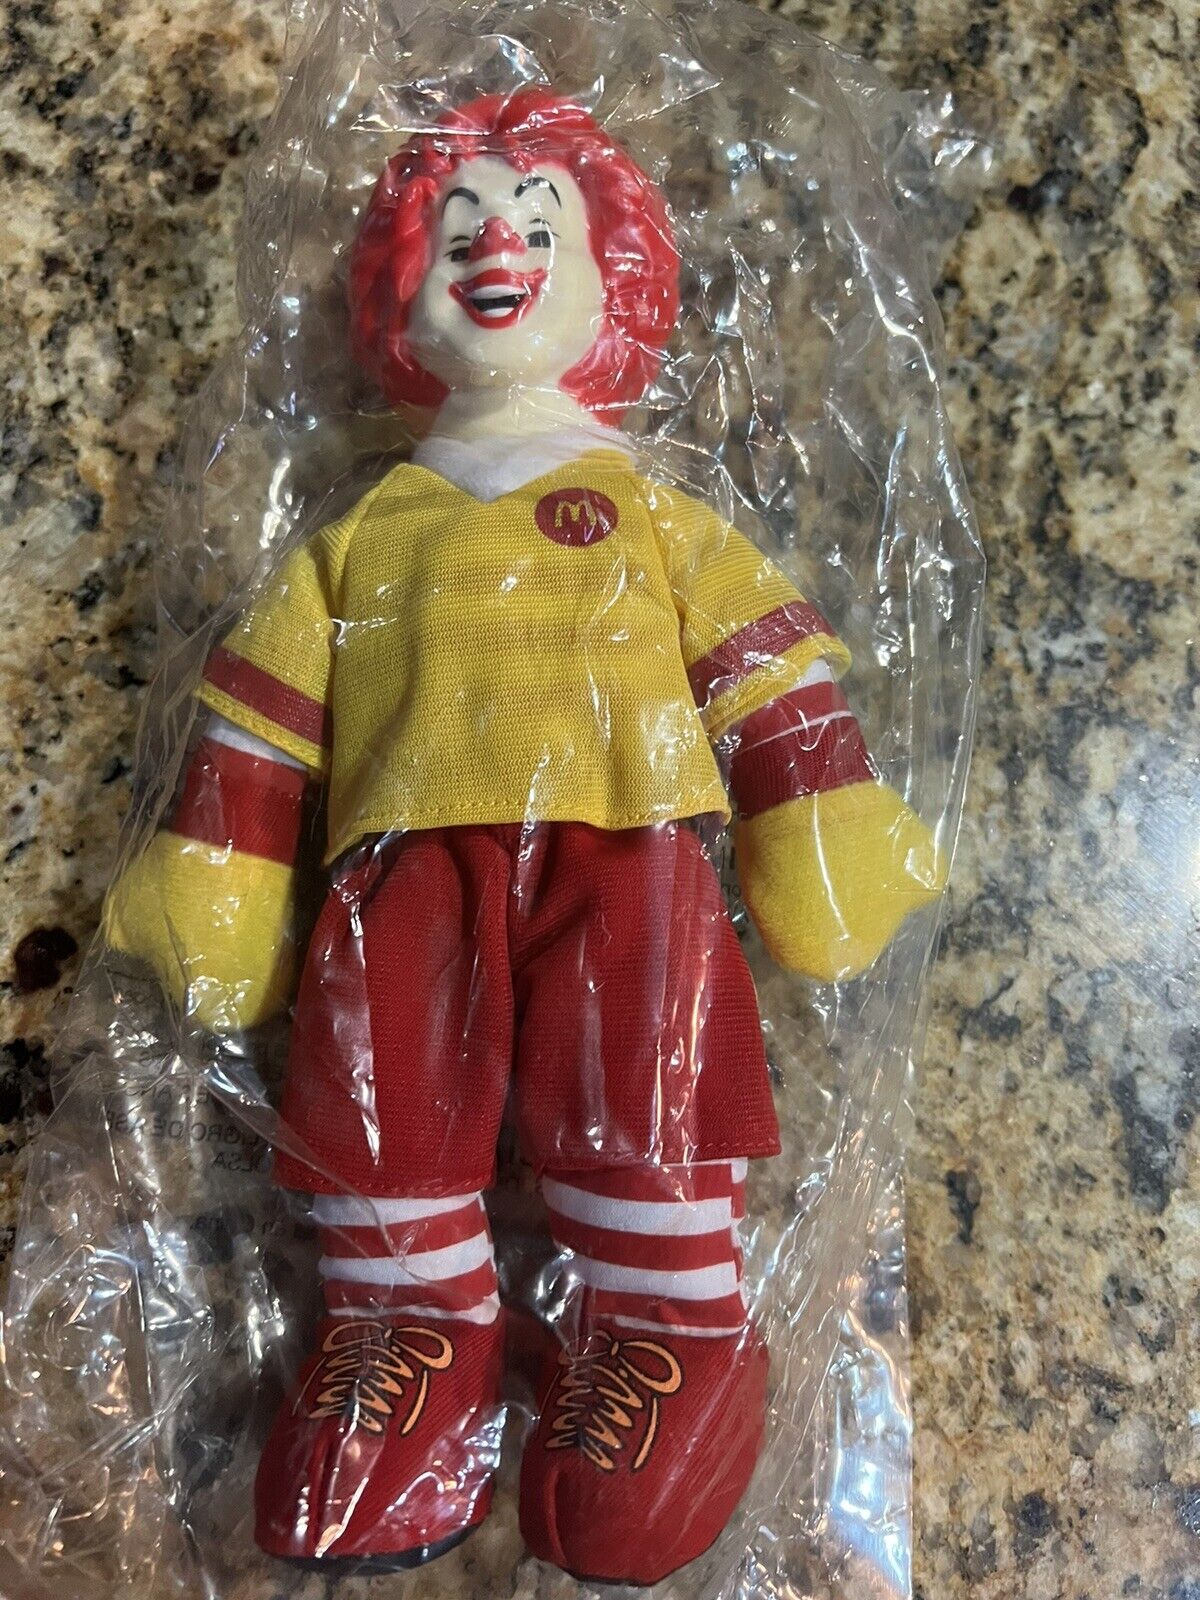 Ronald McDonald Vintage 10” Doll with a Vinyl Head. Vary Rare. In Original Pack